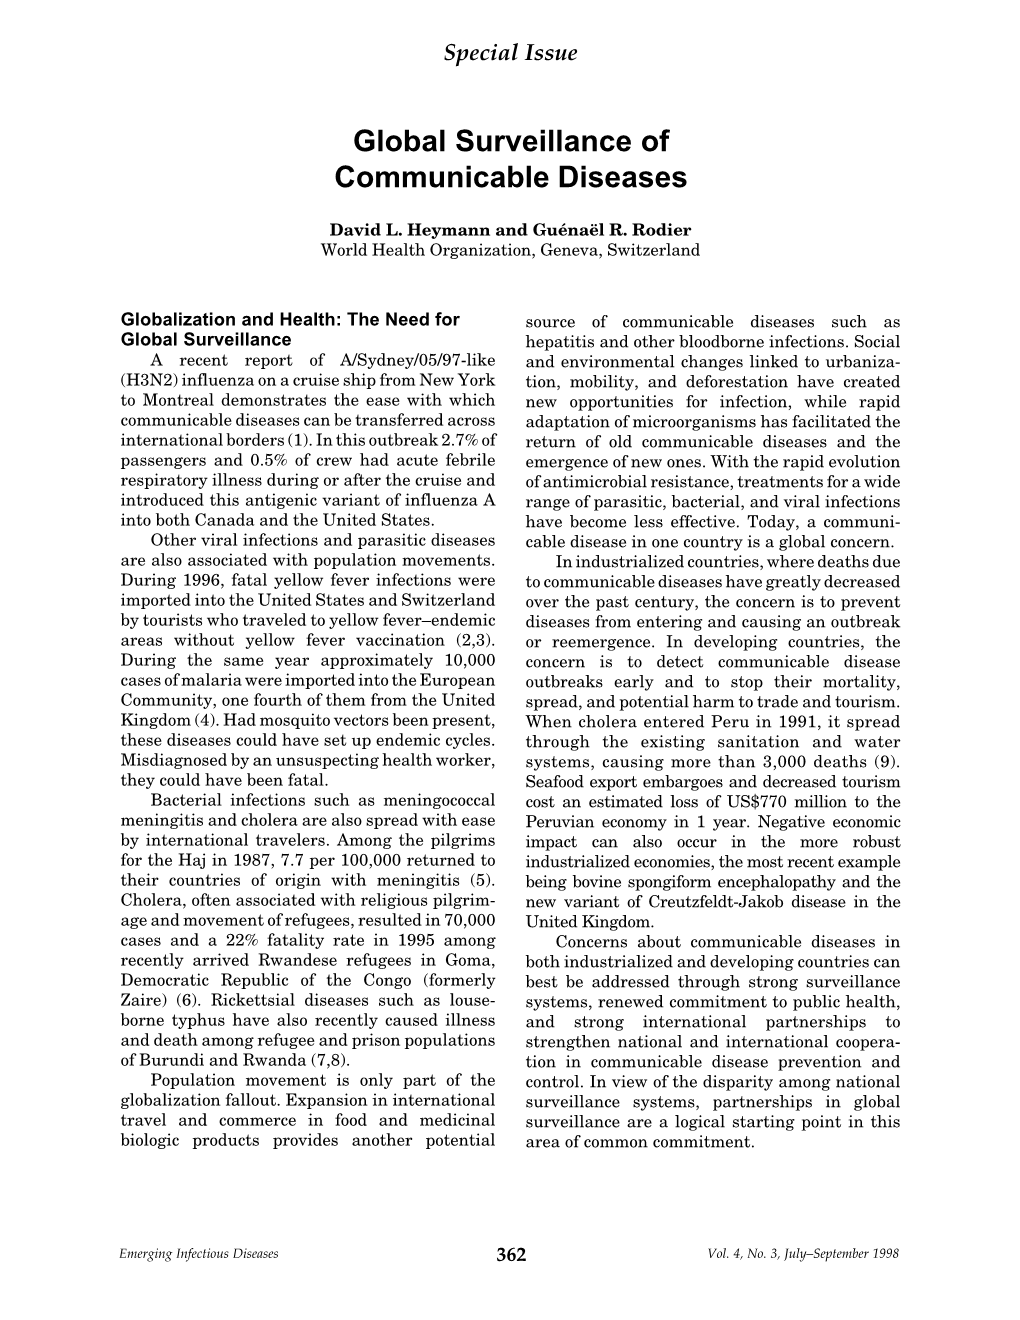 Global Surveillance of Communicable Diseases